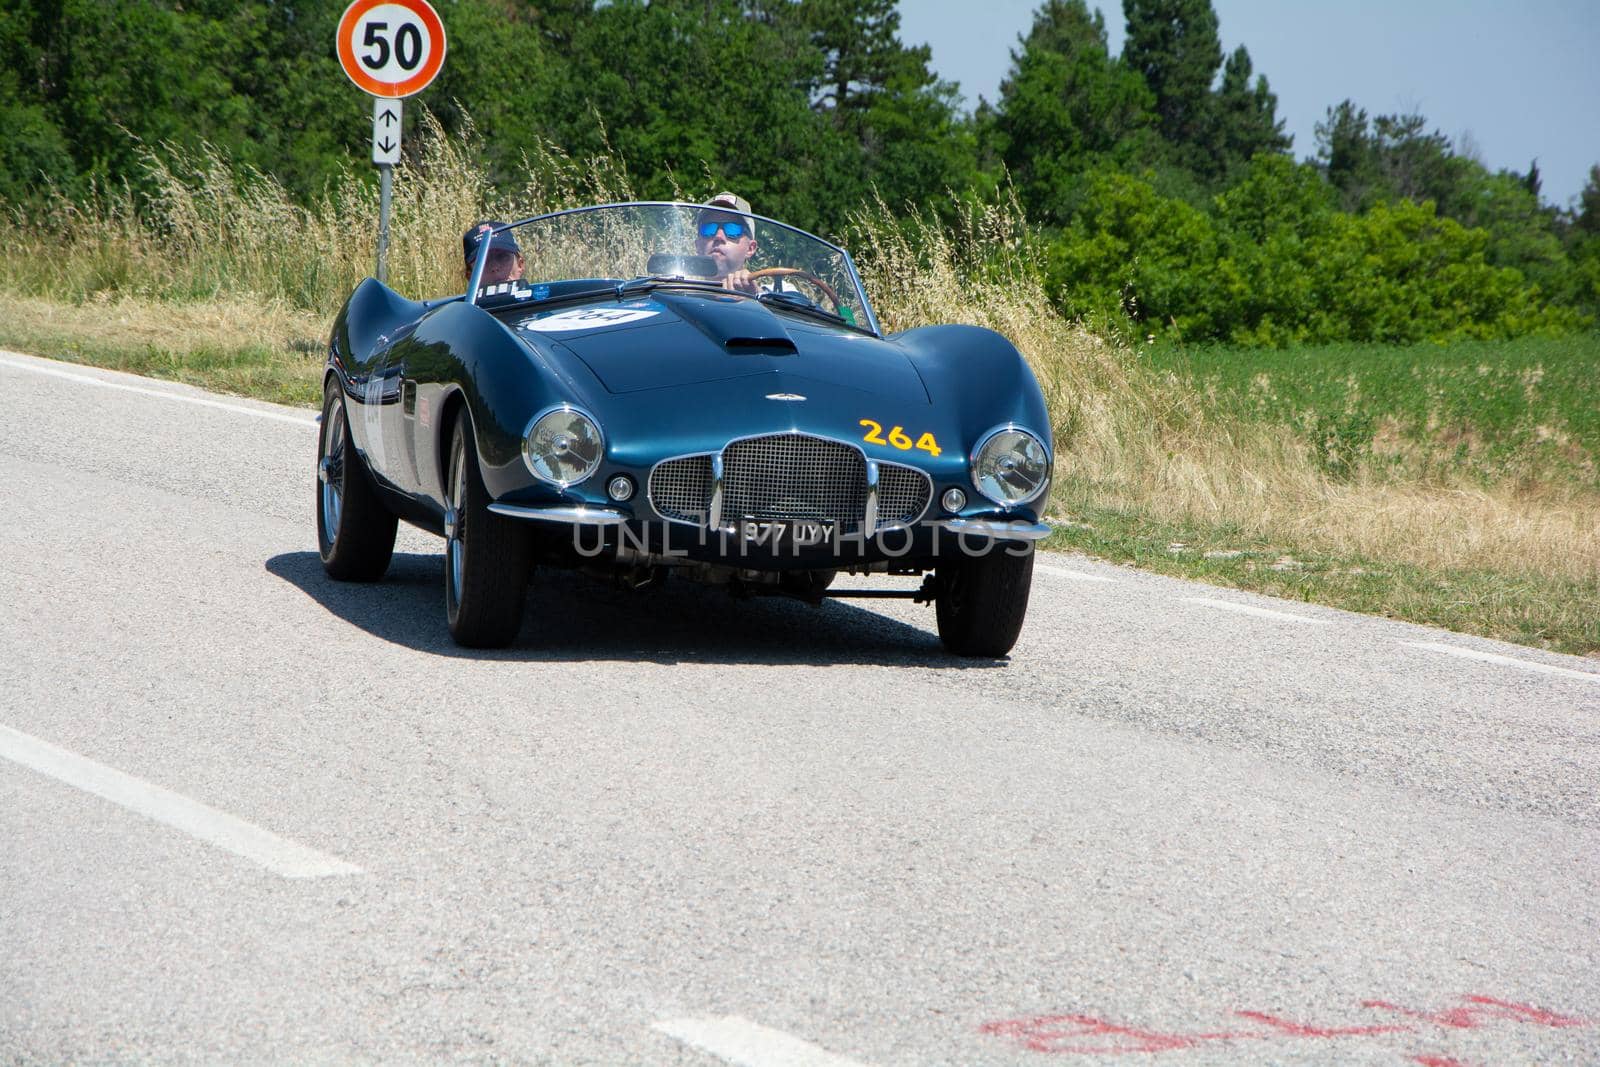 ASTON MARTIN DB 2/4 BERTONE SPIDER 1953 on an old racing car in rally Mille Miglia 2022 the famous italian historical race (1927-1957 by massimocampanari